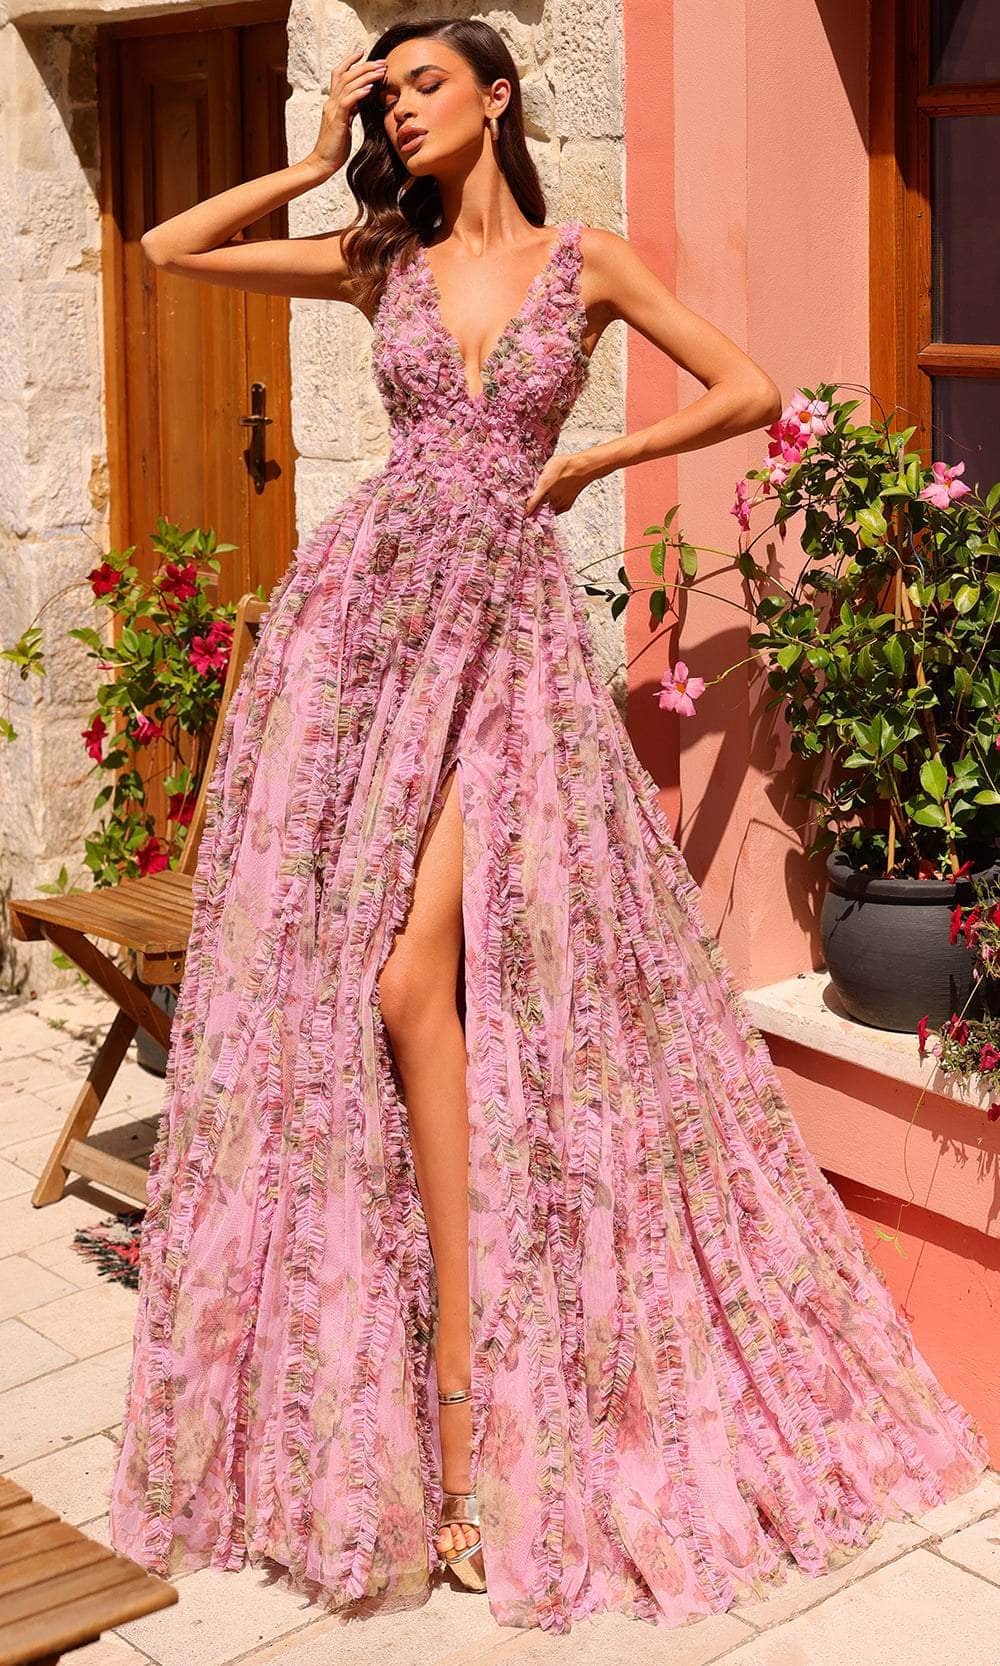 Image of Amarra 88824 - Sleeveless Floral A-Line Prom Dress